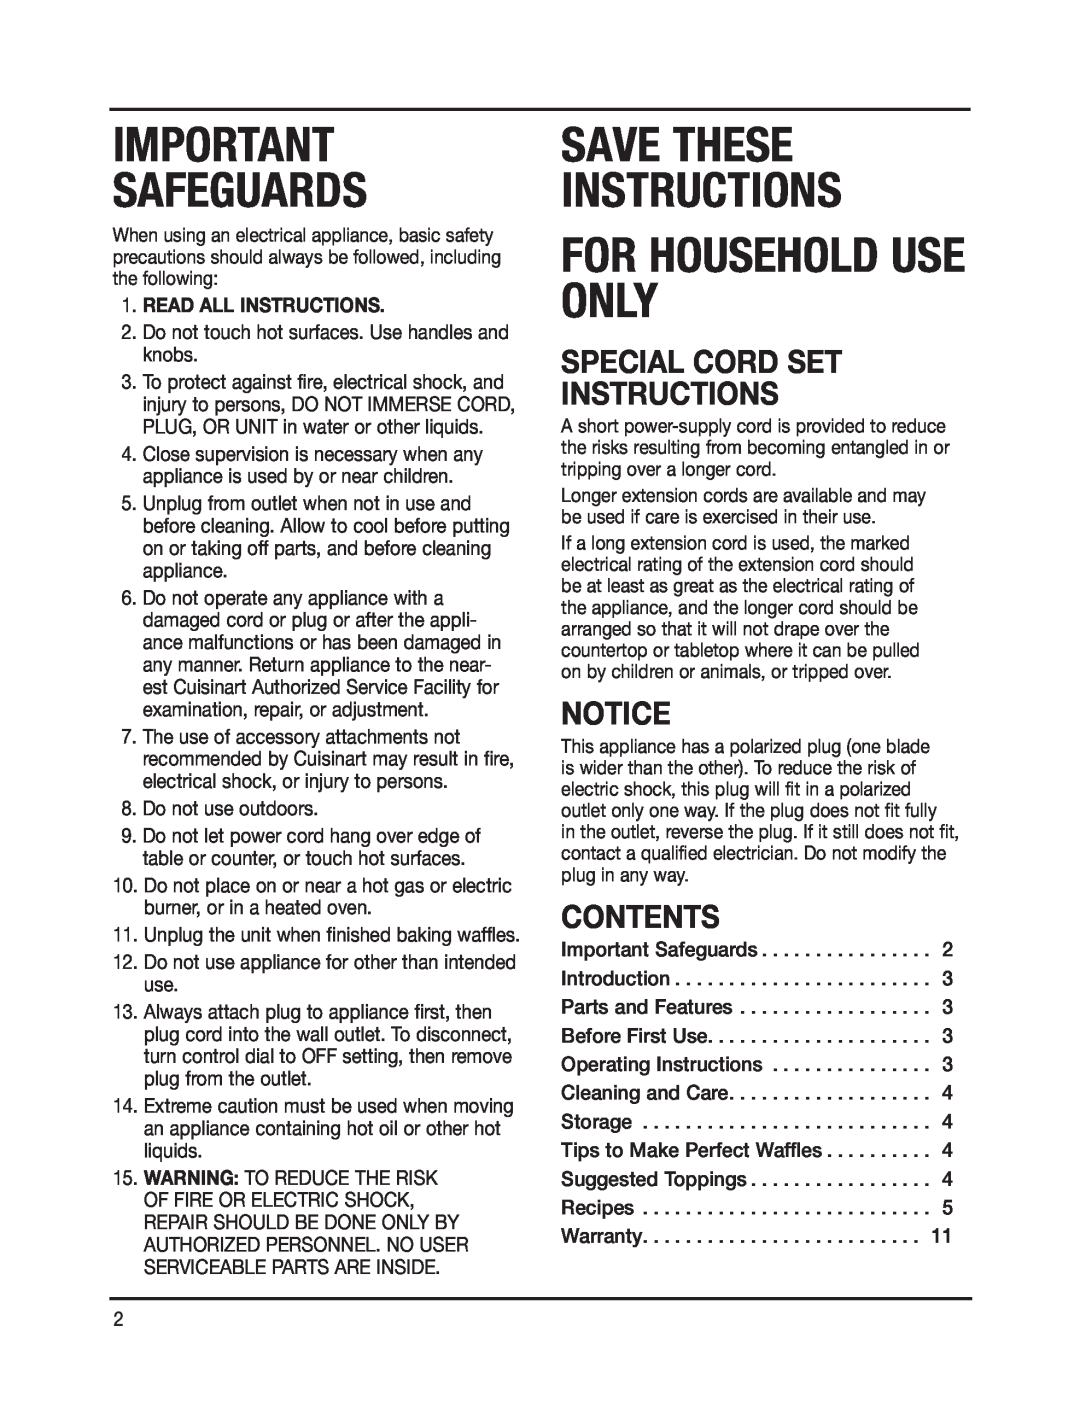 Cuisinart WAF-4B Special Cord Set Instructions, Contents, Safeguards, Save These Instructions, For Household Use Only 